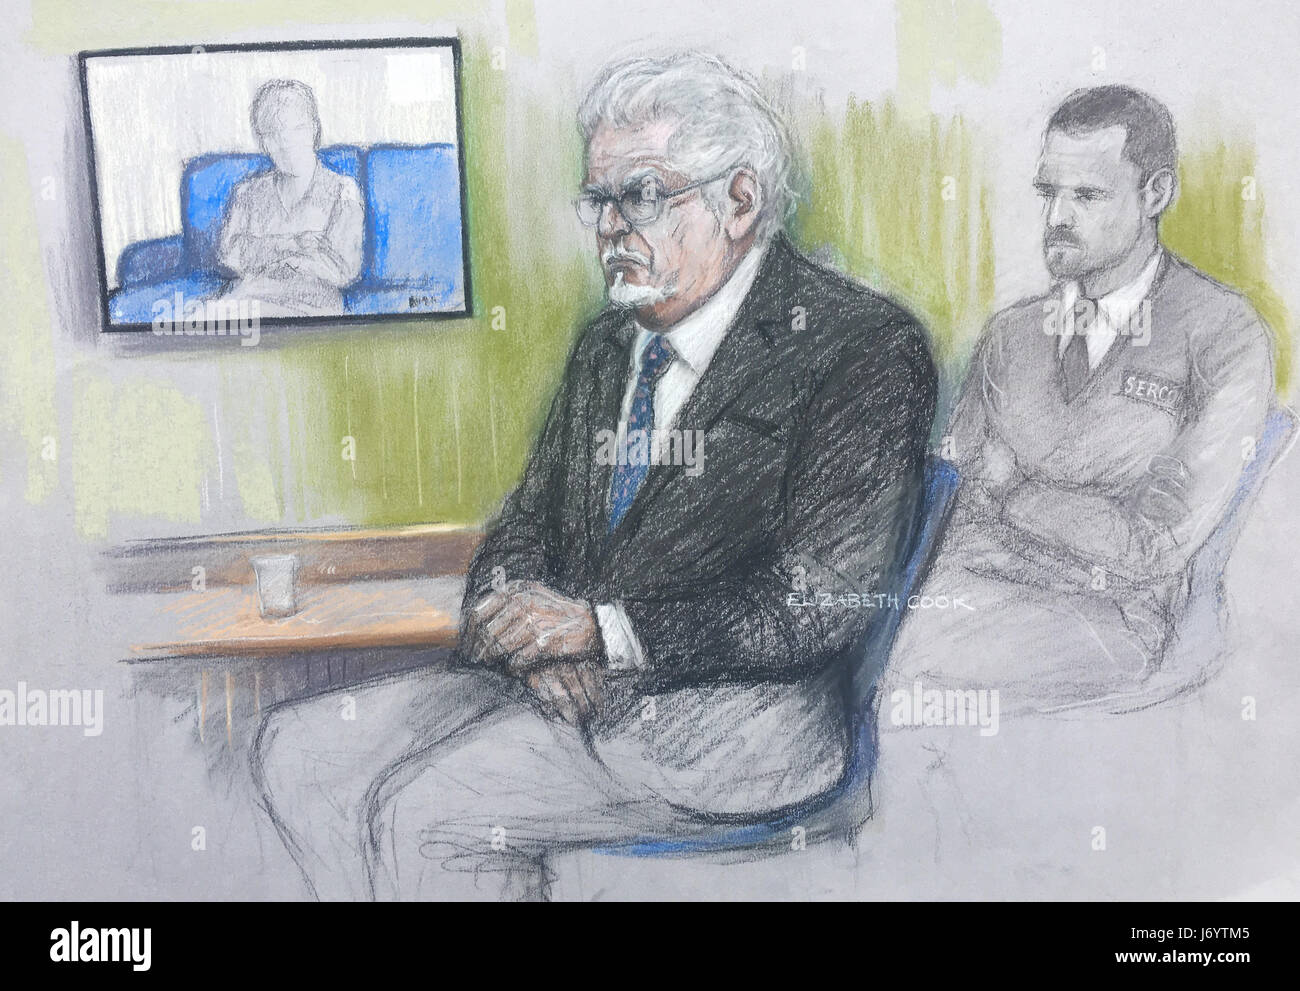 Court artist sketch by Elizabeth Cook of Rolf Harris, 87, in the dock at Southwark Crown Court in London, where an alleged victim appeared by via video link. Stock Photo